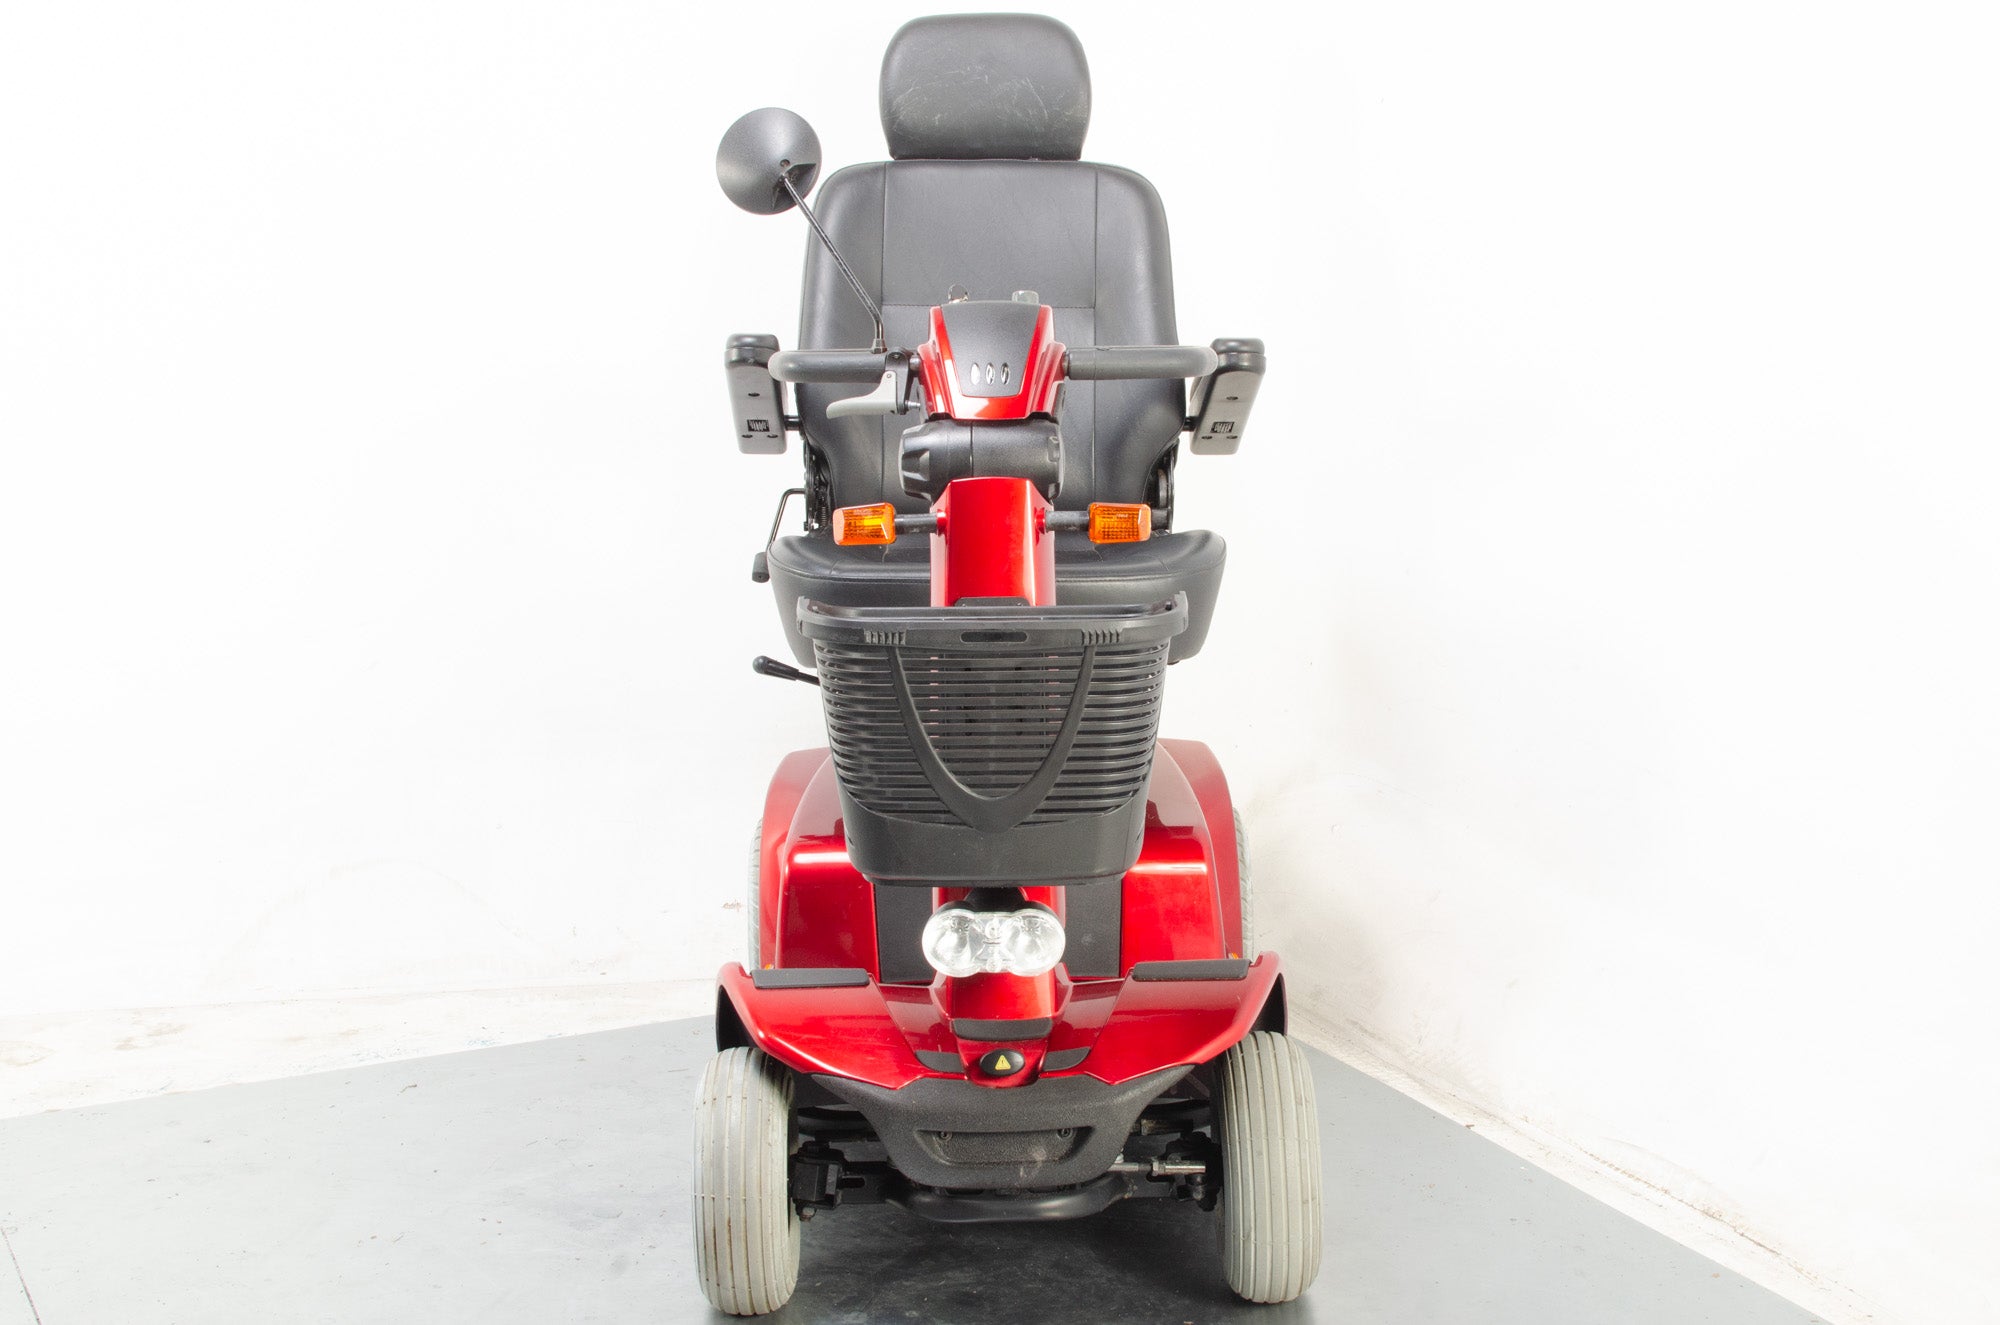 Pride Celebrity X Deluxe Used Electric Mobility Scooter Comfy Pneumatic Suspension Pavement